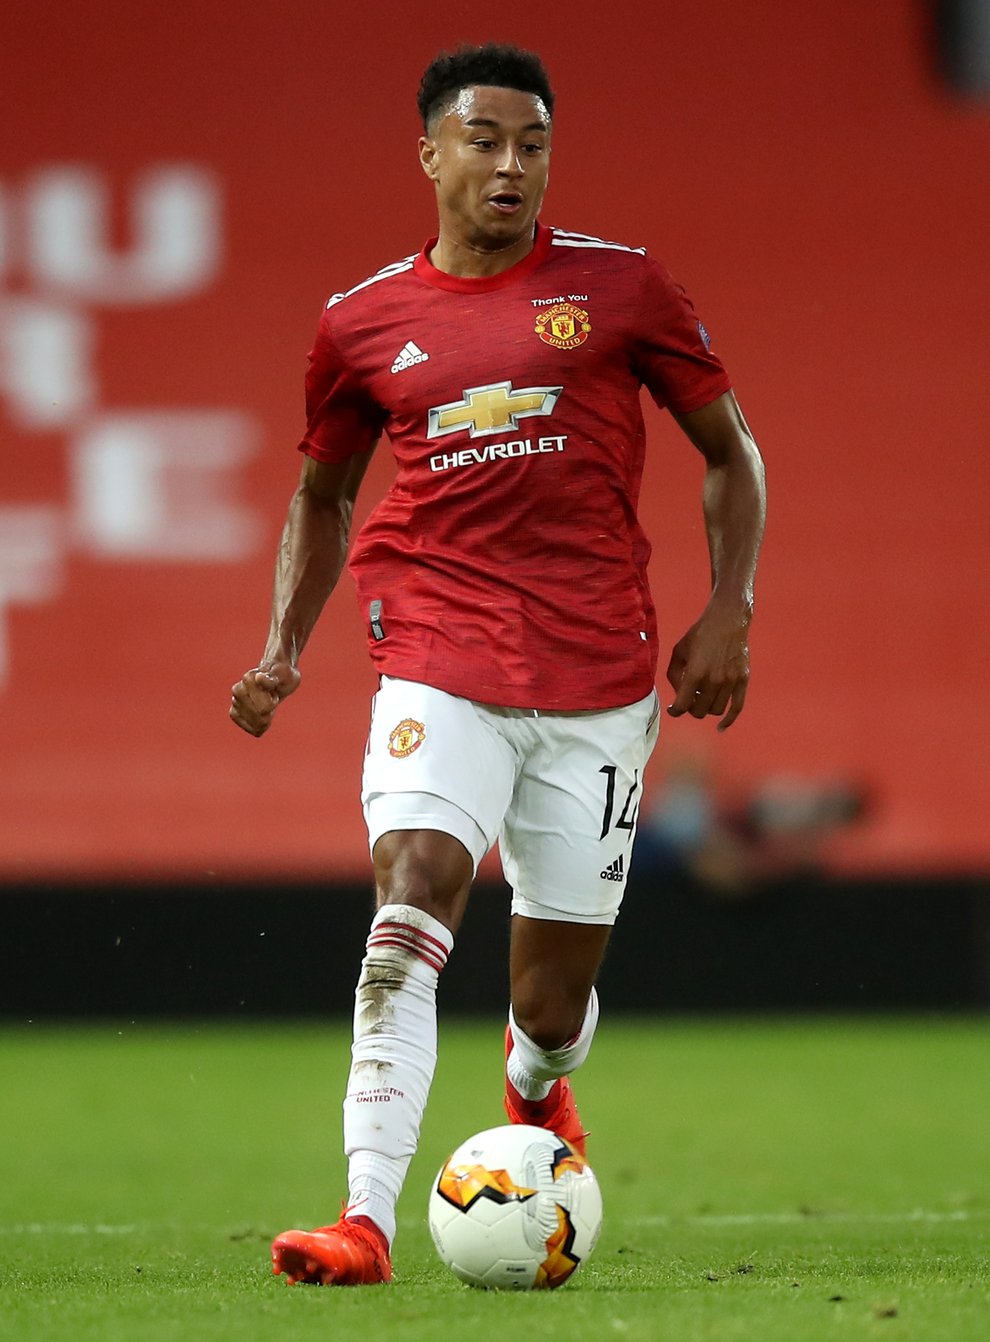 Jesse Lingard has struggled for playing time recently